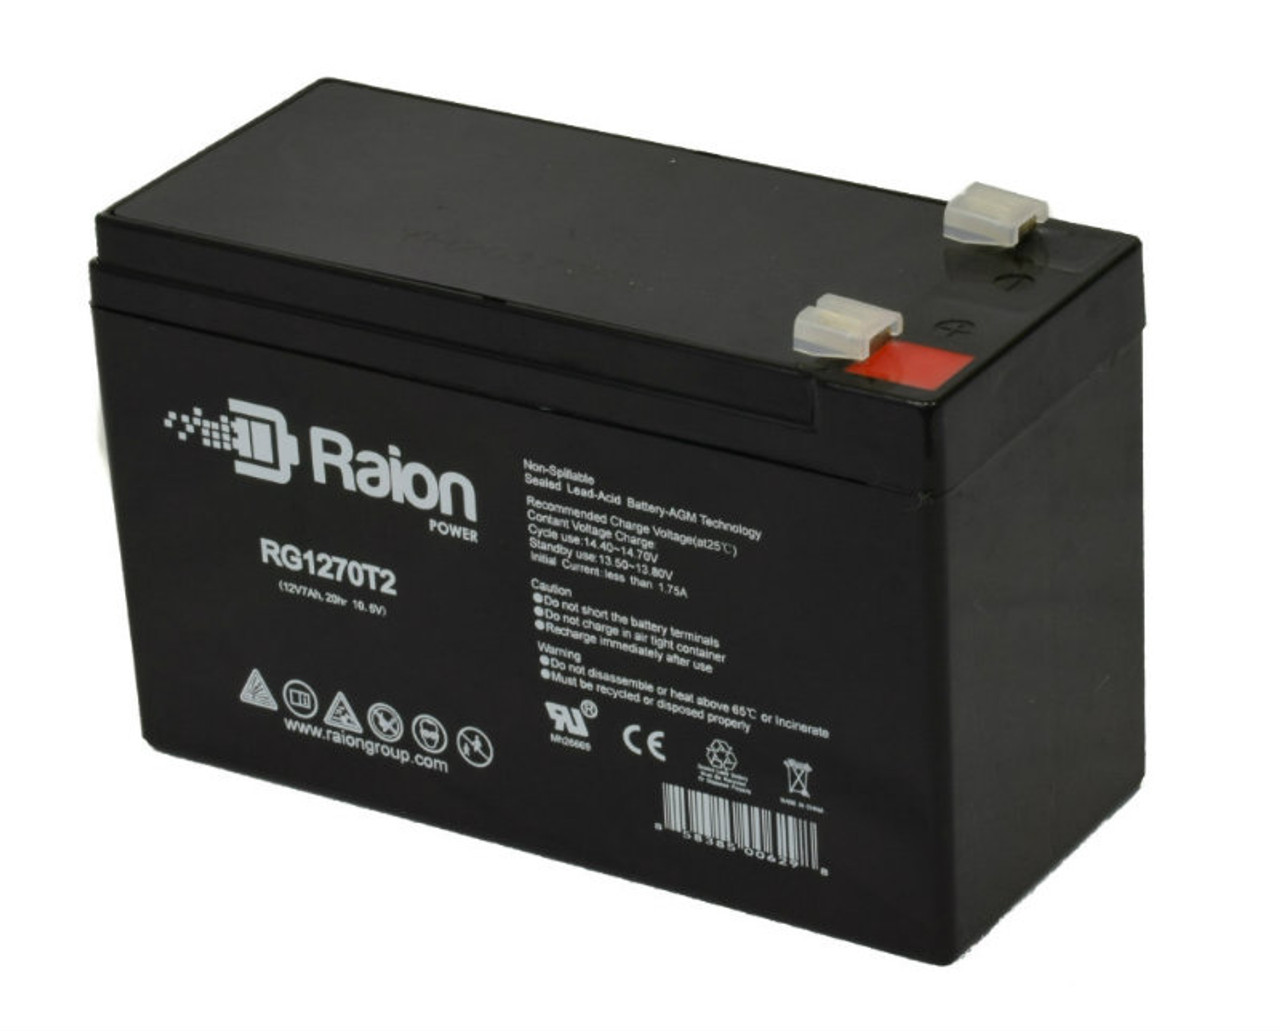 Raion Power RG1270T1 12V 7Ah Non-Spillable Replacement Battery for Medcare Products Bariatric Portable Ceiling Lift